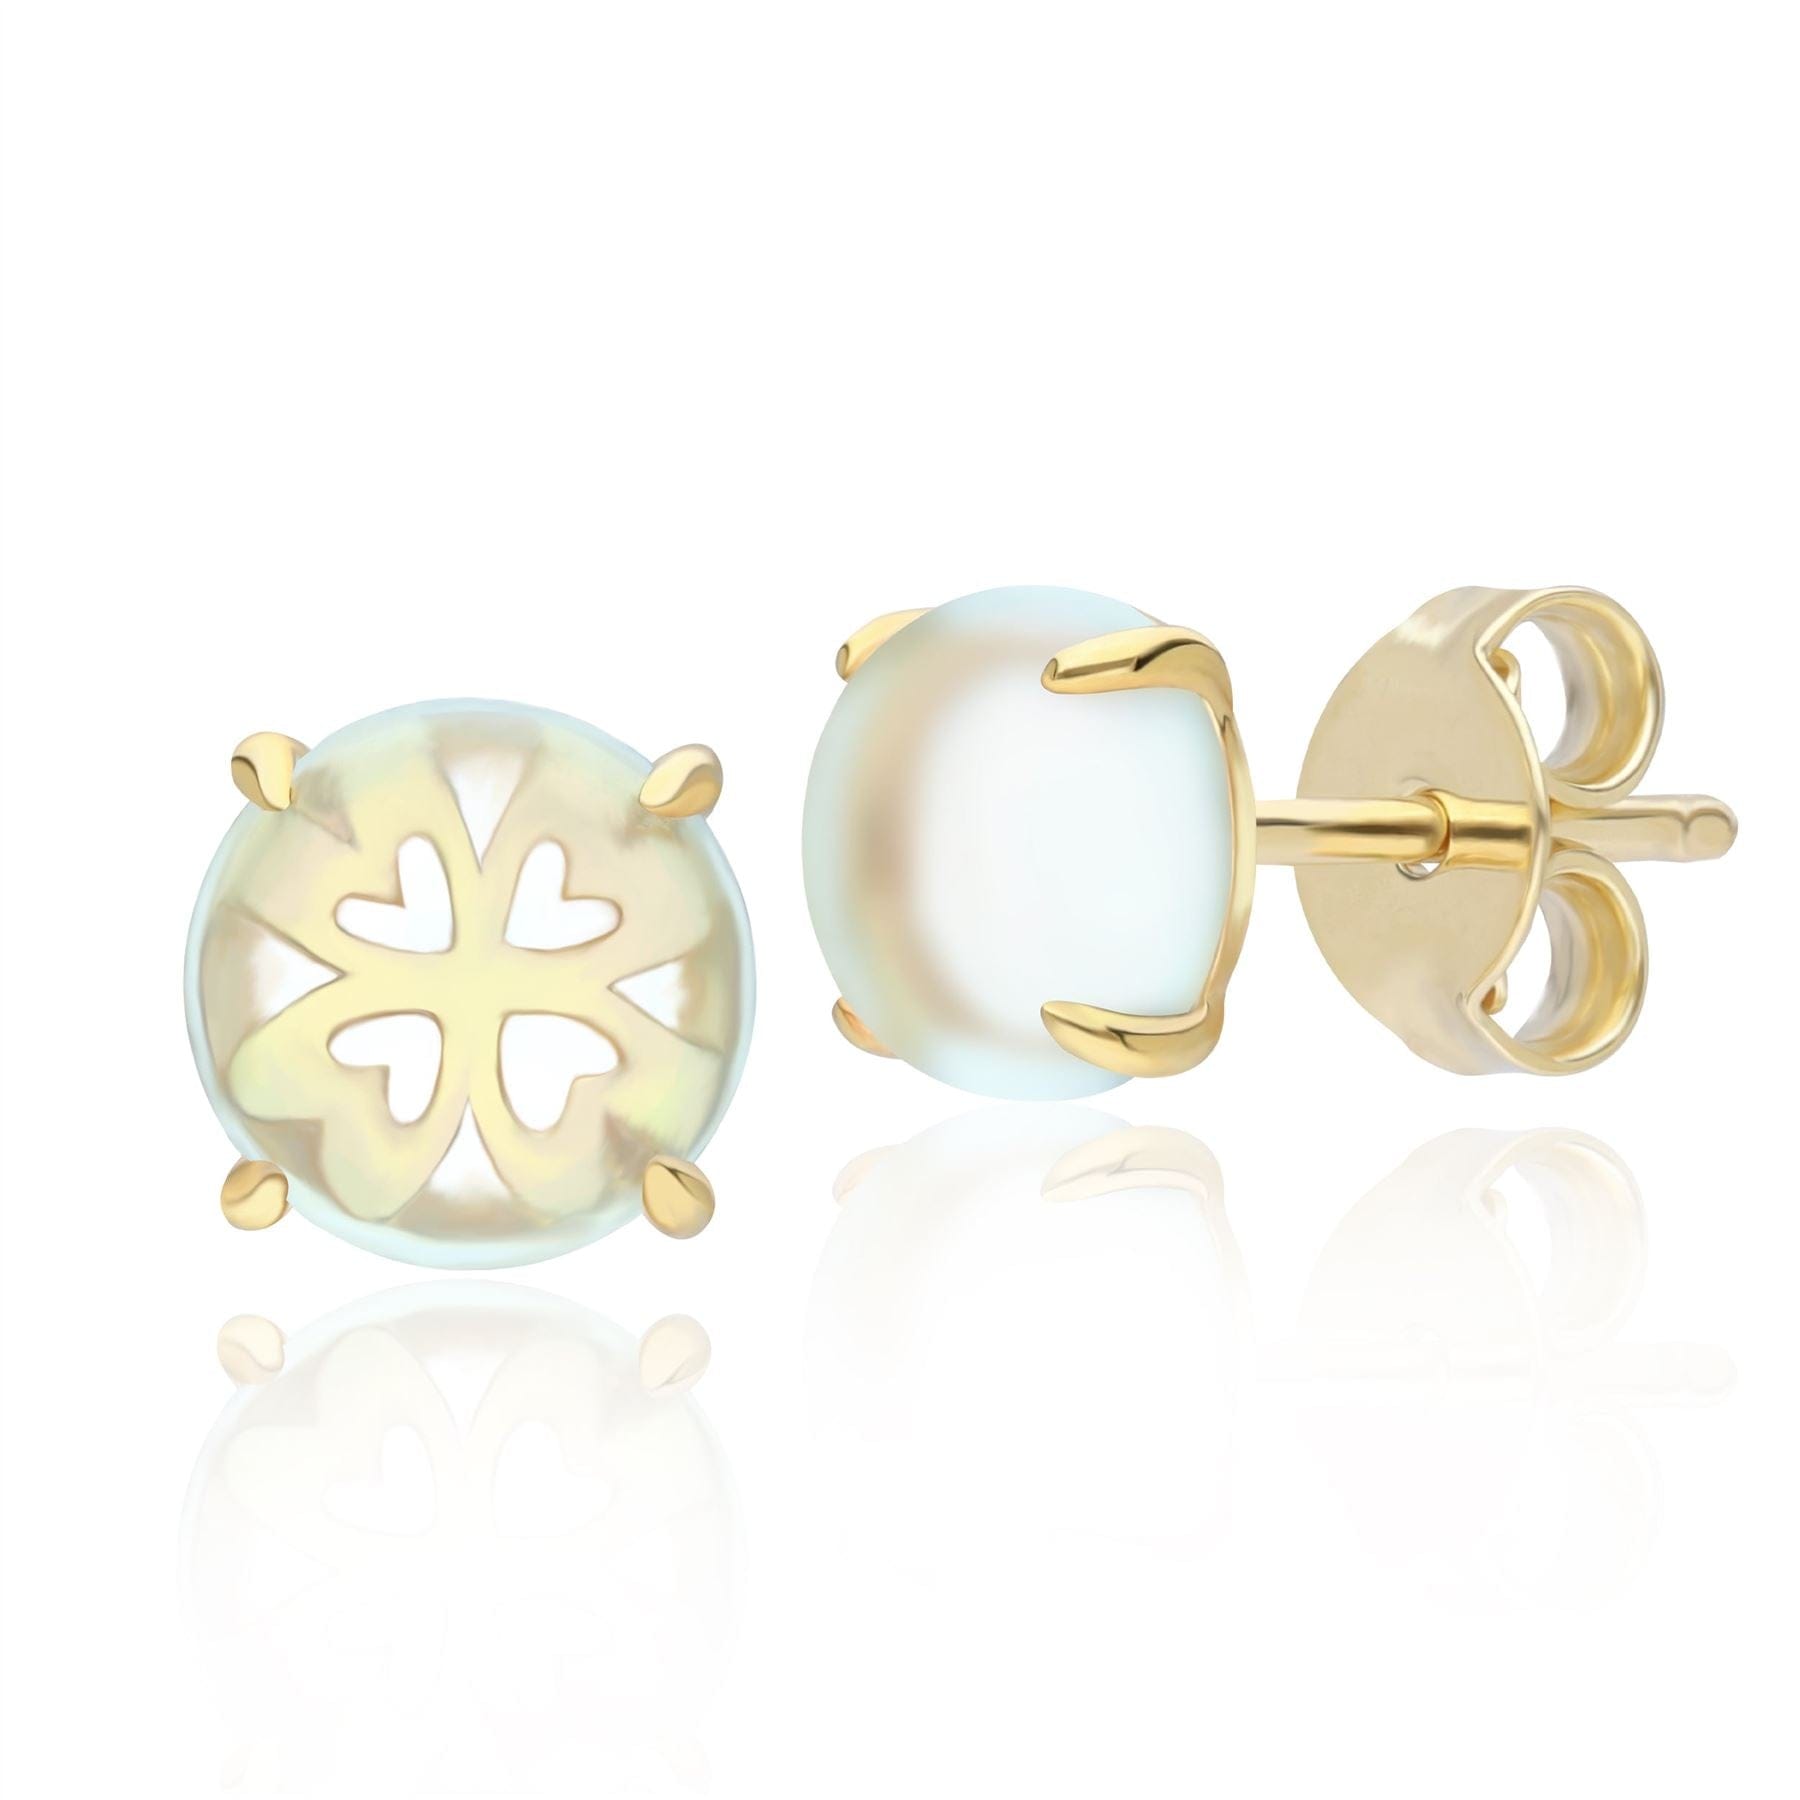 253E391803925 Gardenia Green Mint Quartz Cabochon Stud Earrings in Gold Plated Sterling Silver Front